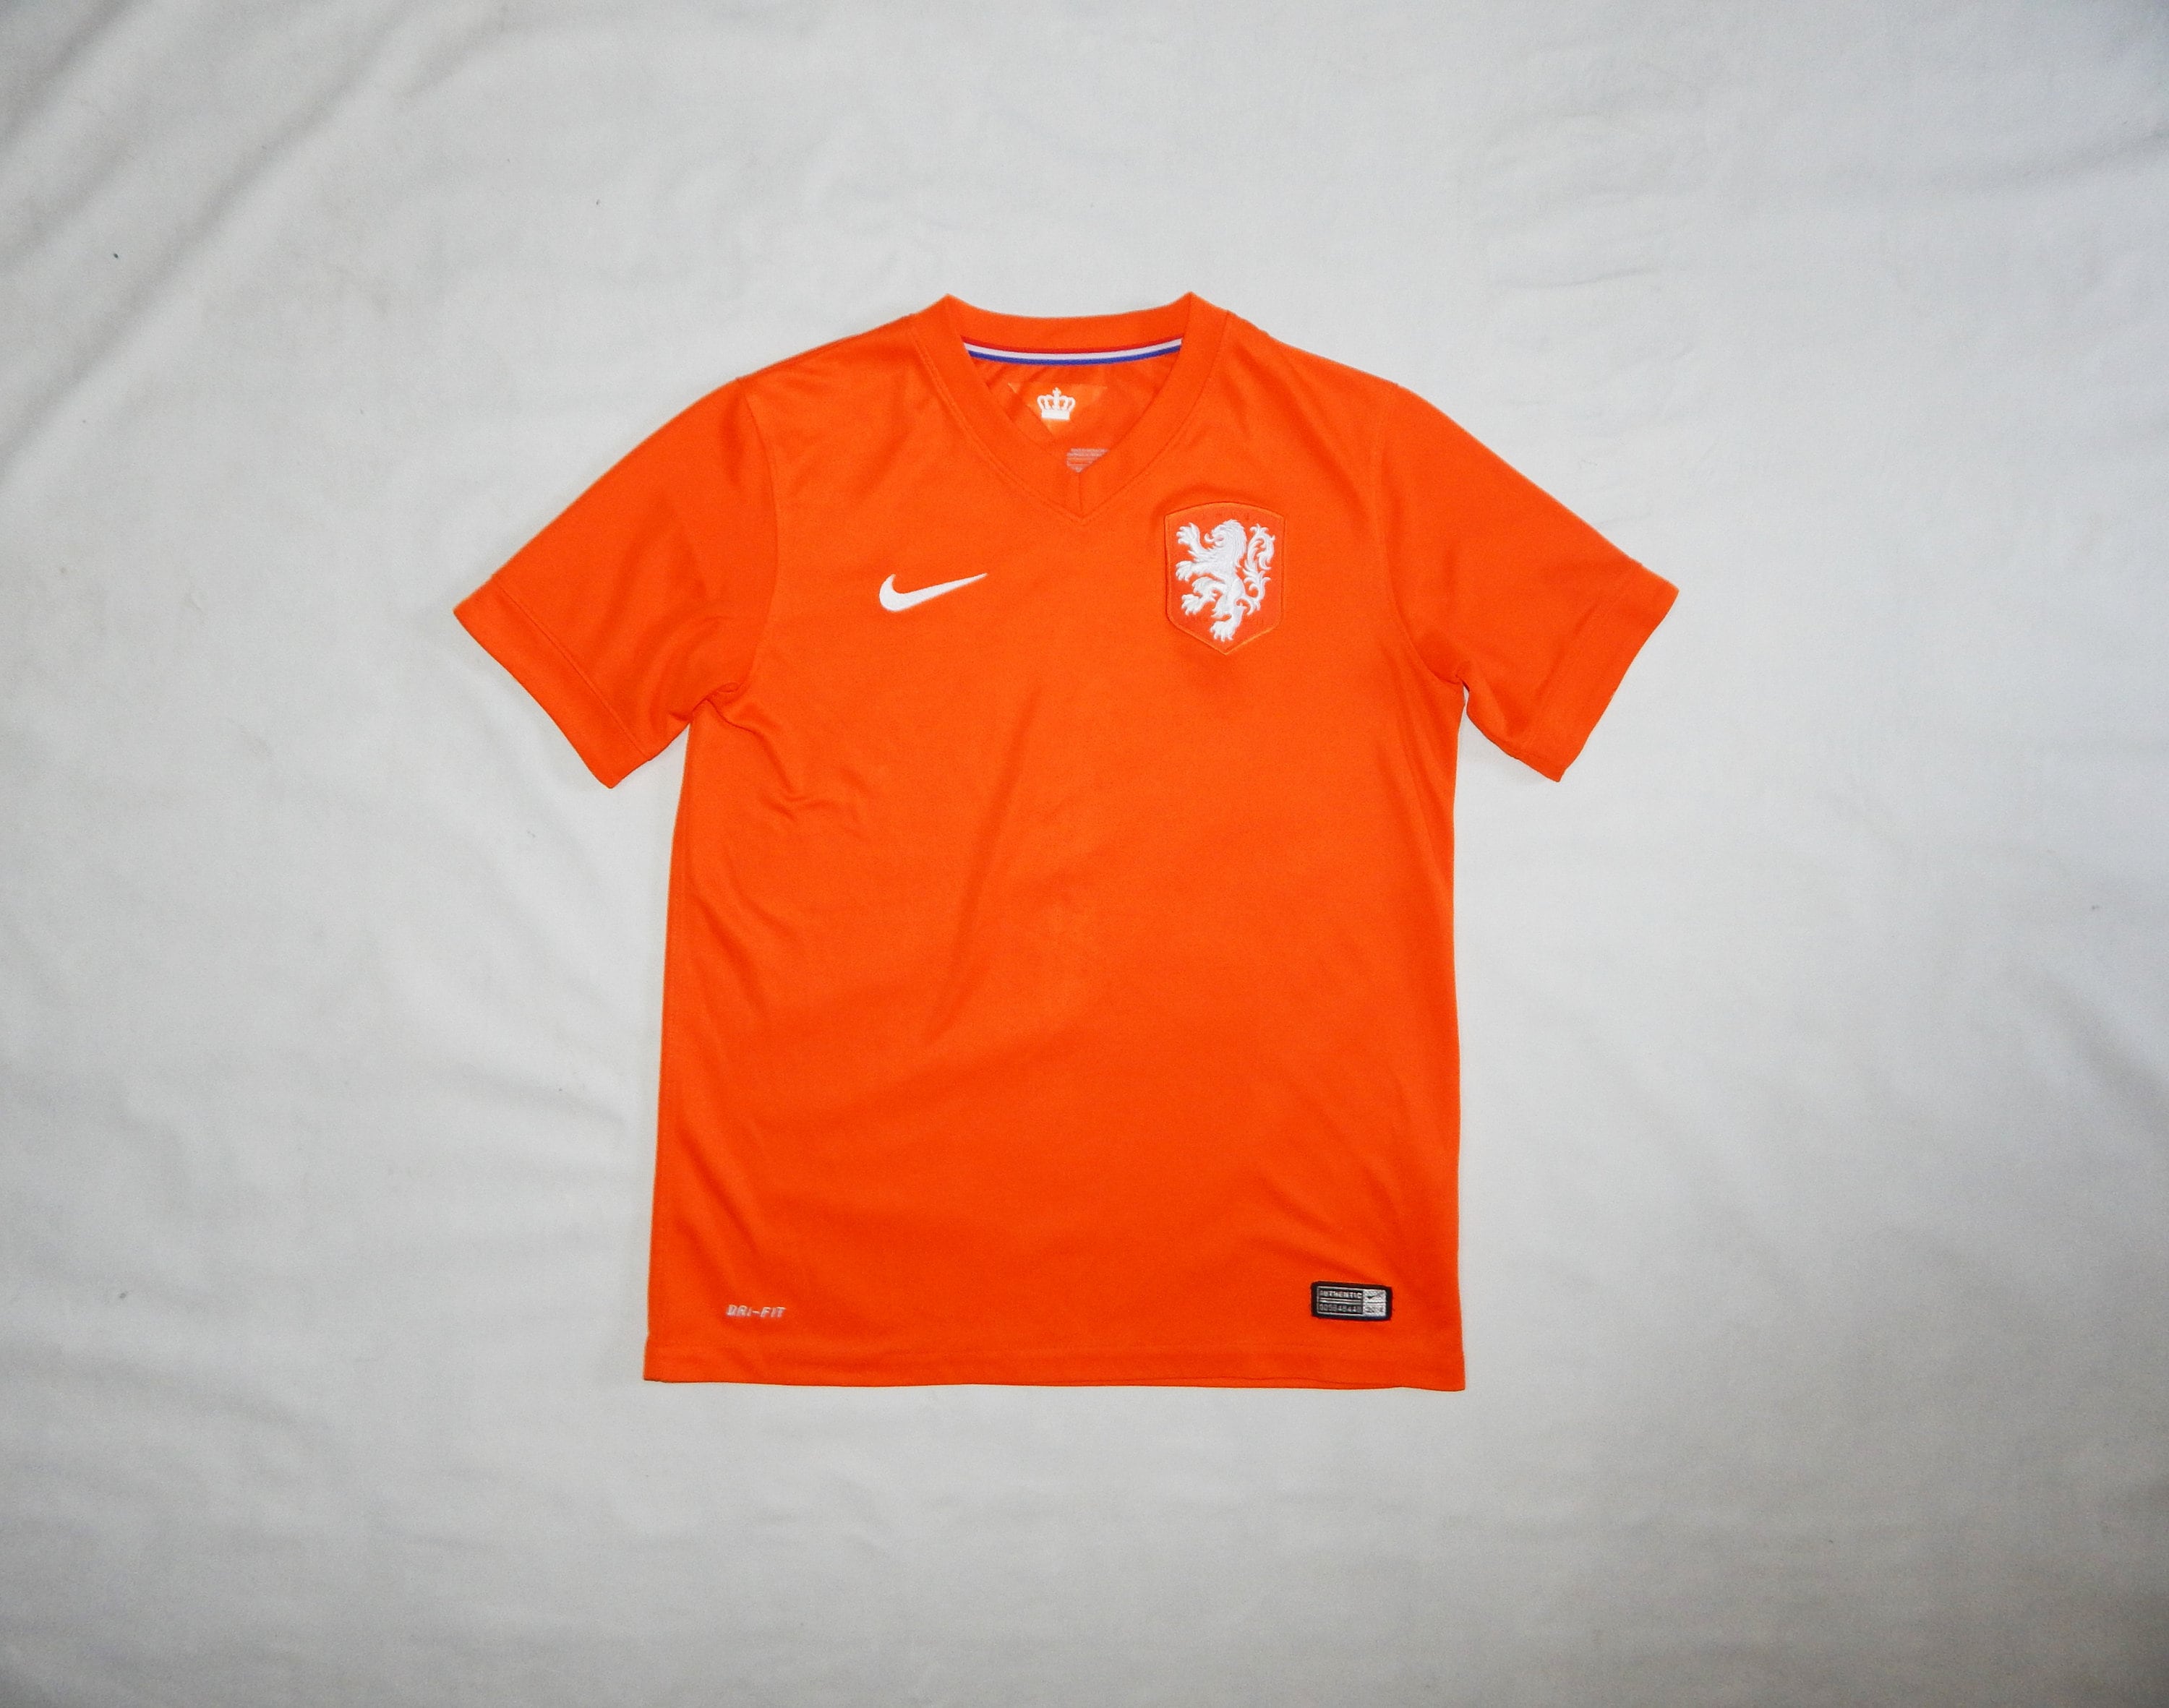 Vintagewonderswell Nike Holland Netherlands Official 2014 Football Soccer Jersey, Size 12-13 Years, Orange Colour